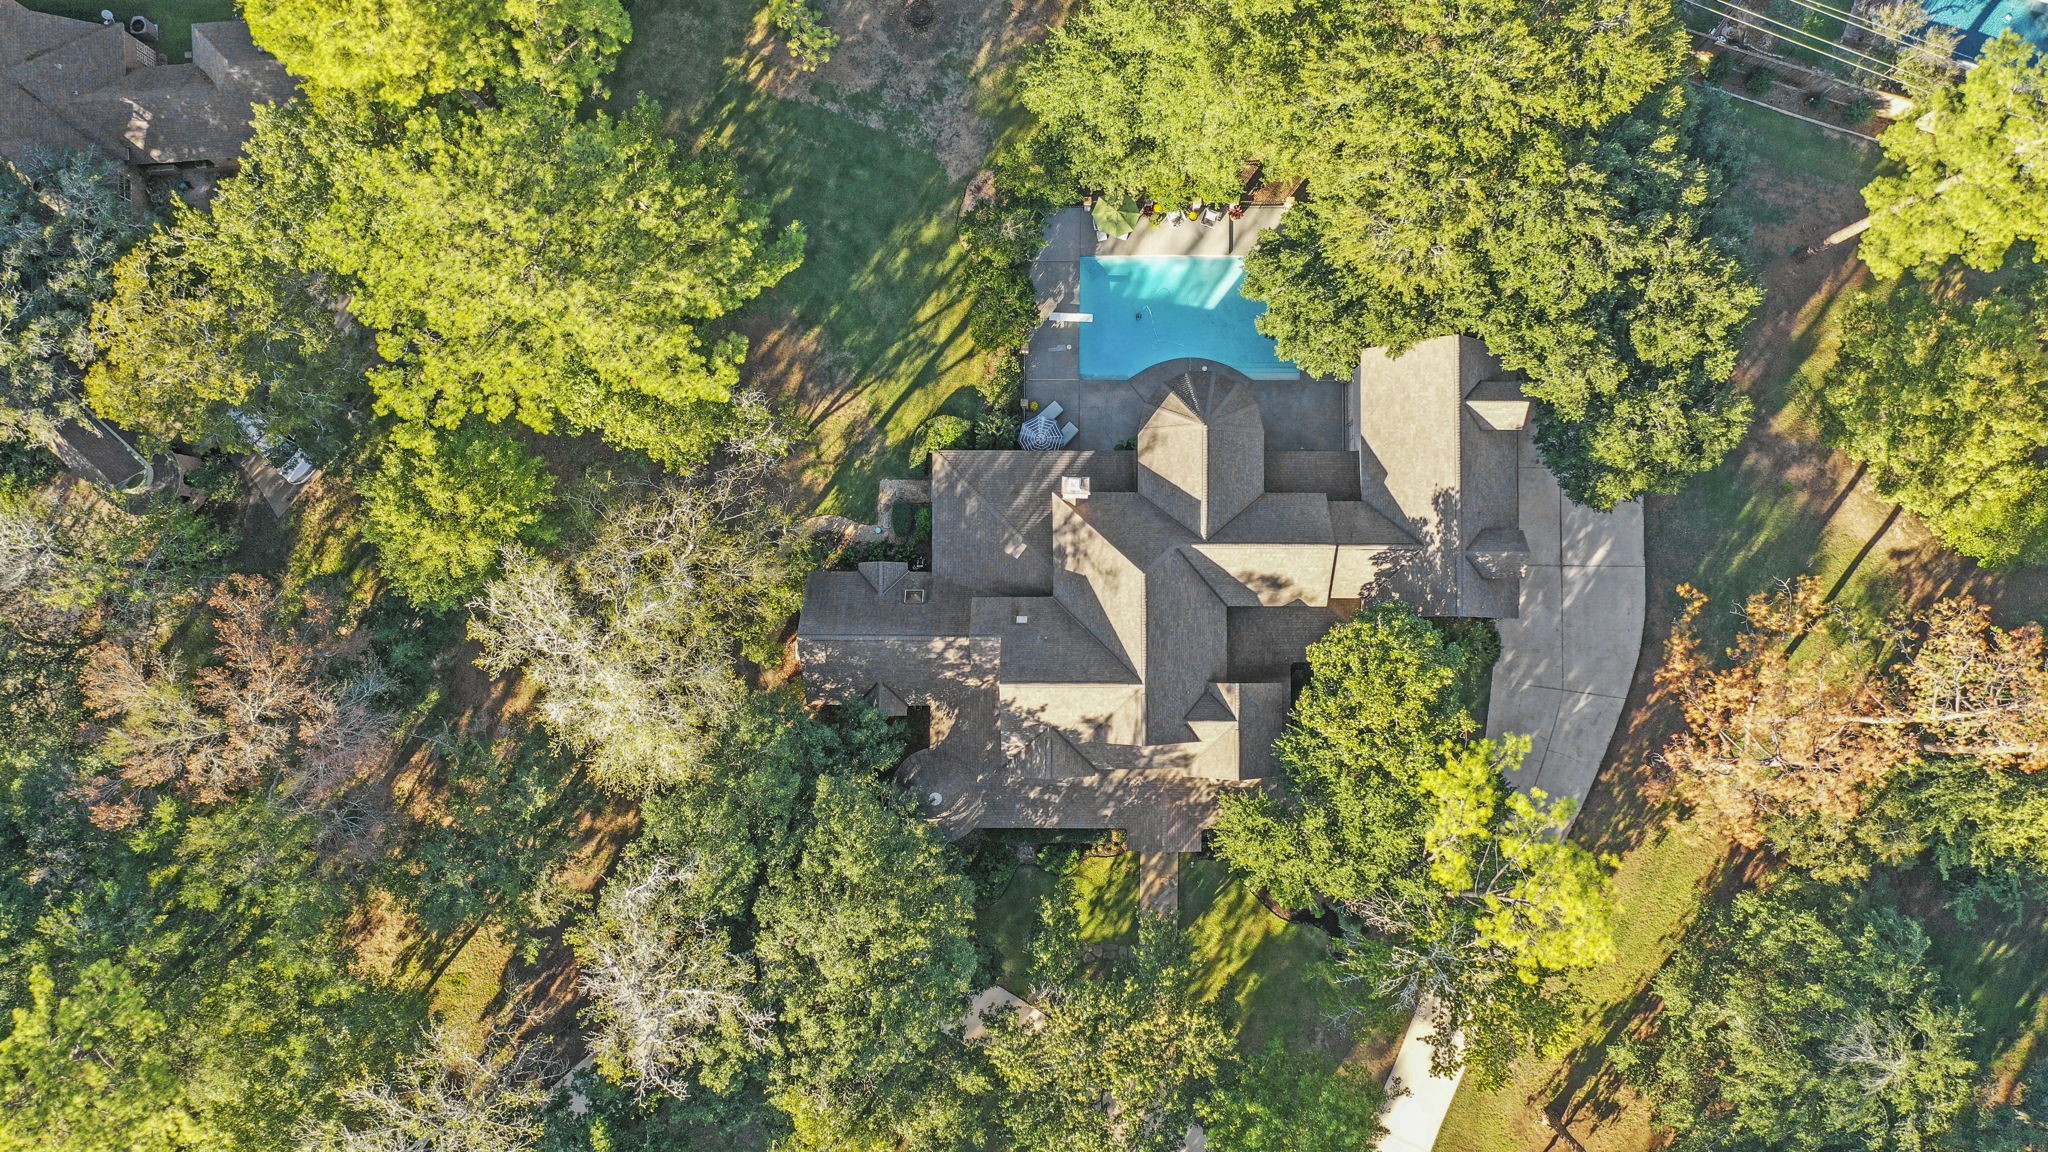 Bird's eye view of the property.